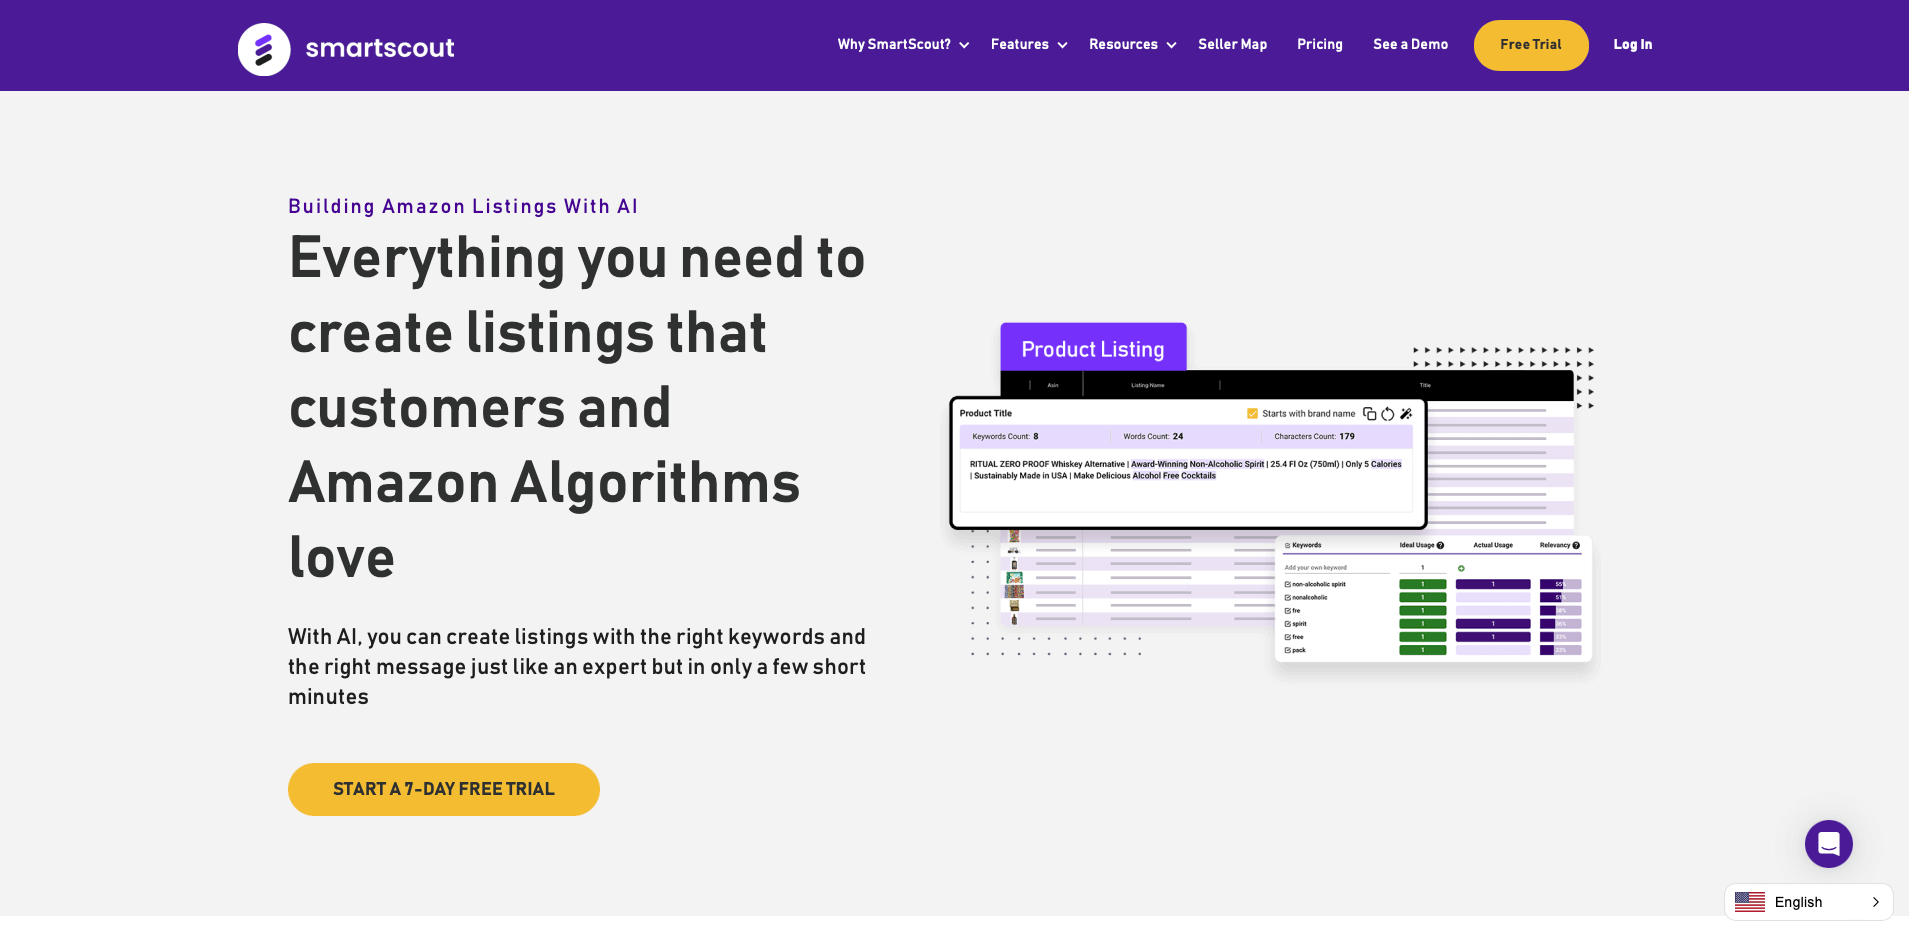 Smartscout AI product listing tool